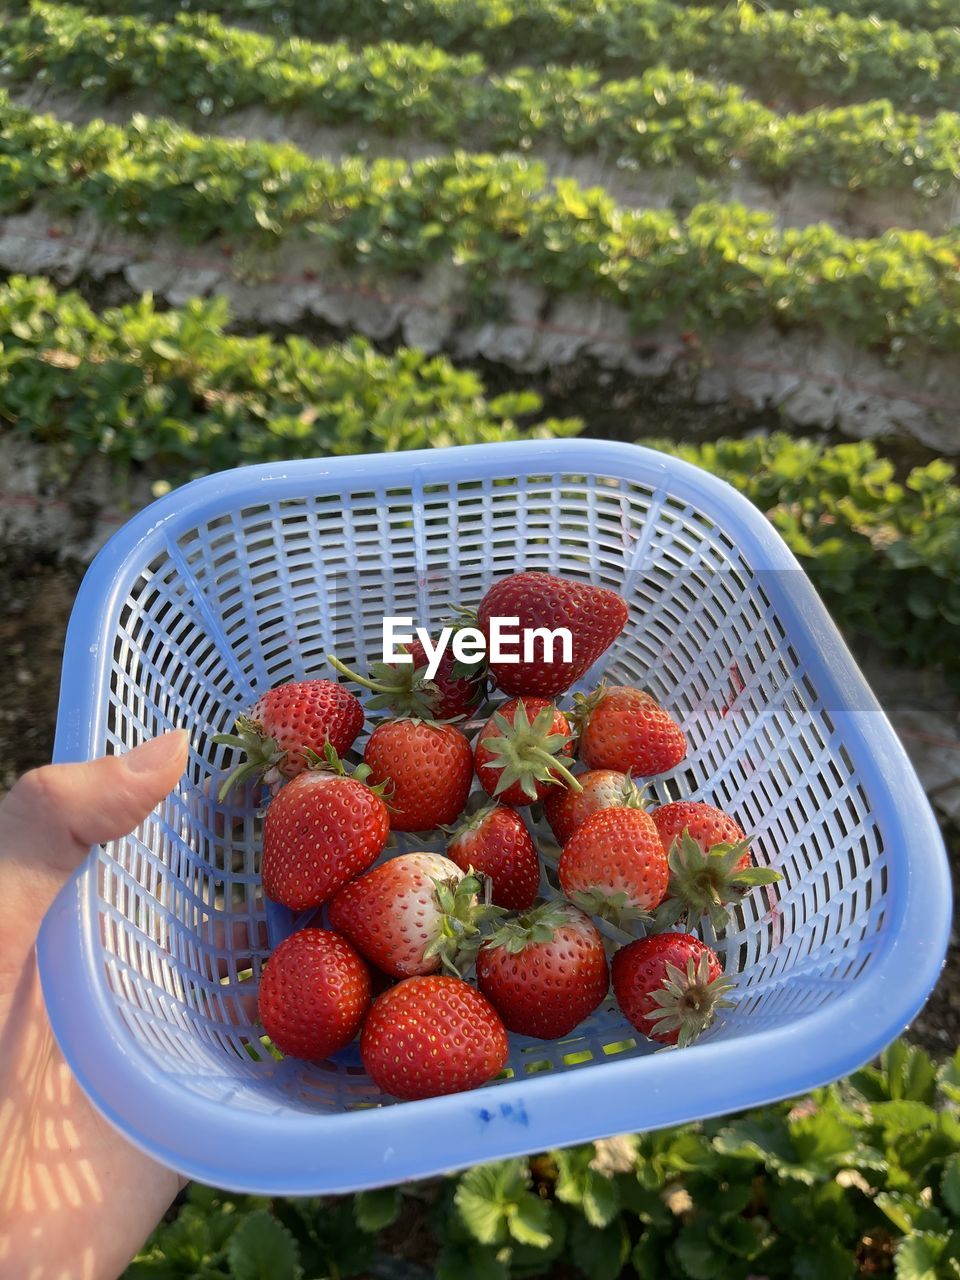 PERSON HOLDING STRAWBERRY IN CONTAINER